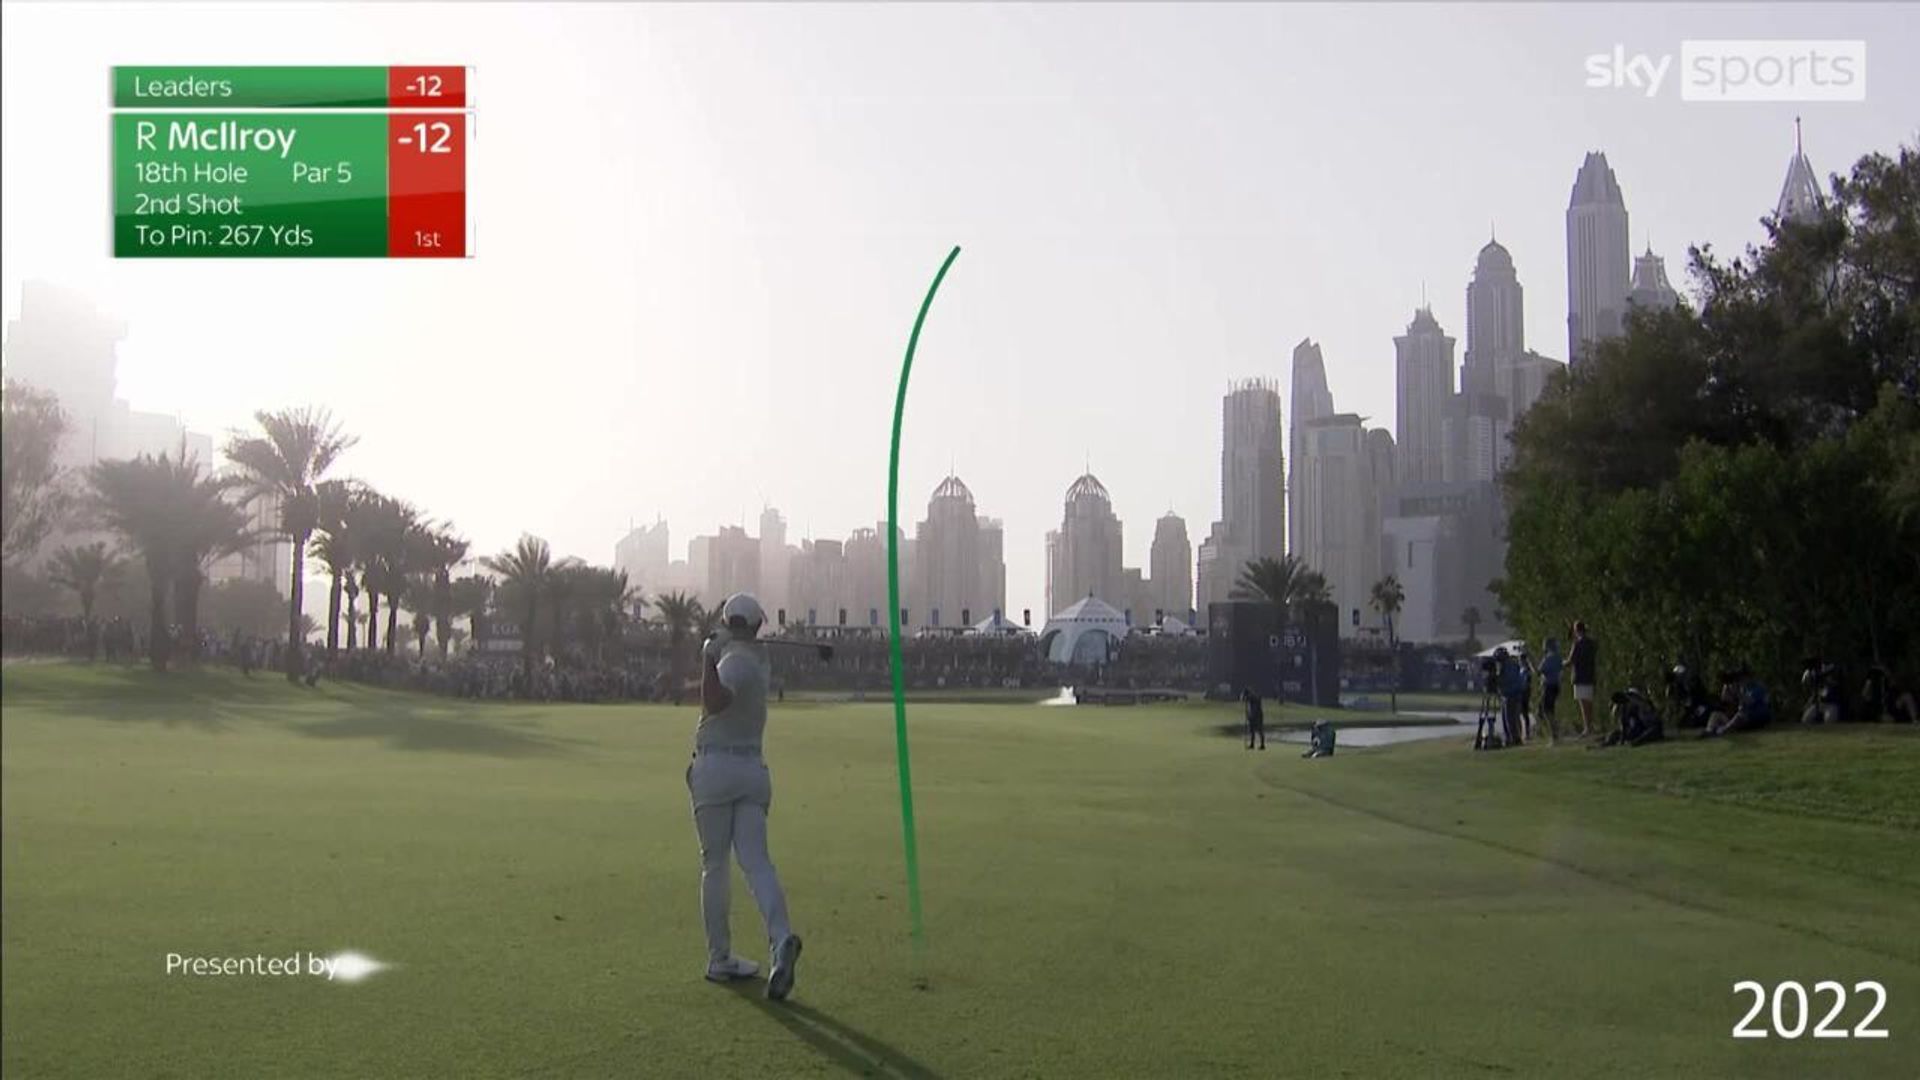 Third time lucky! McIlroy banishes hole 18 water demons to seal Dubai win